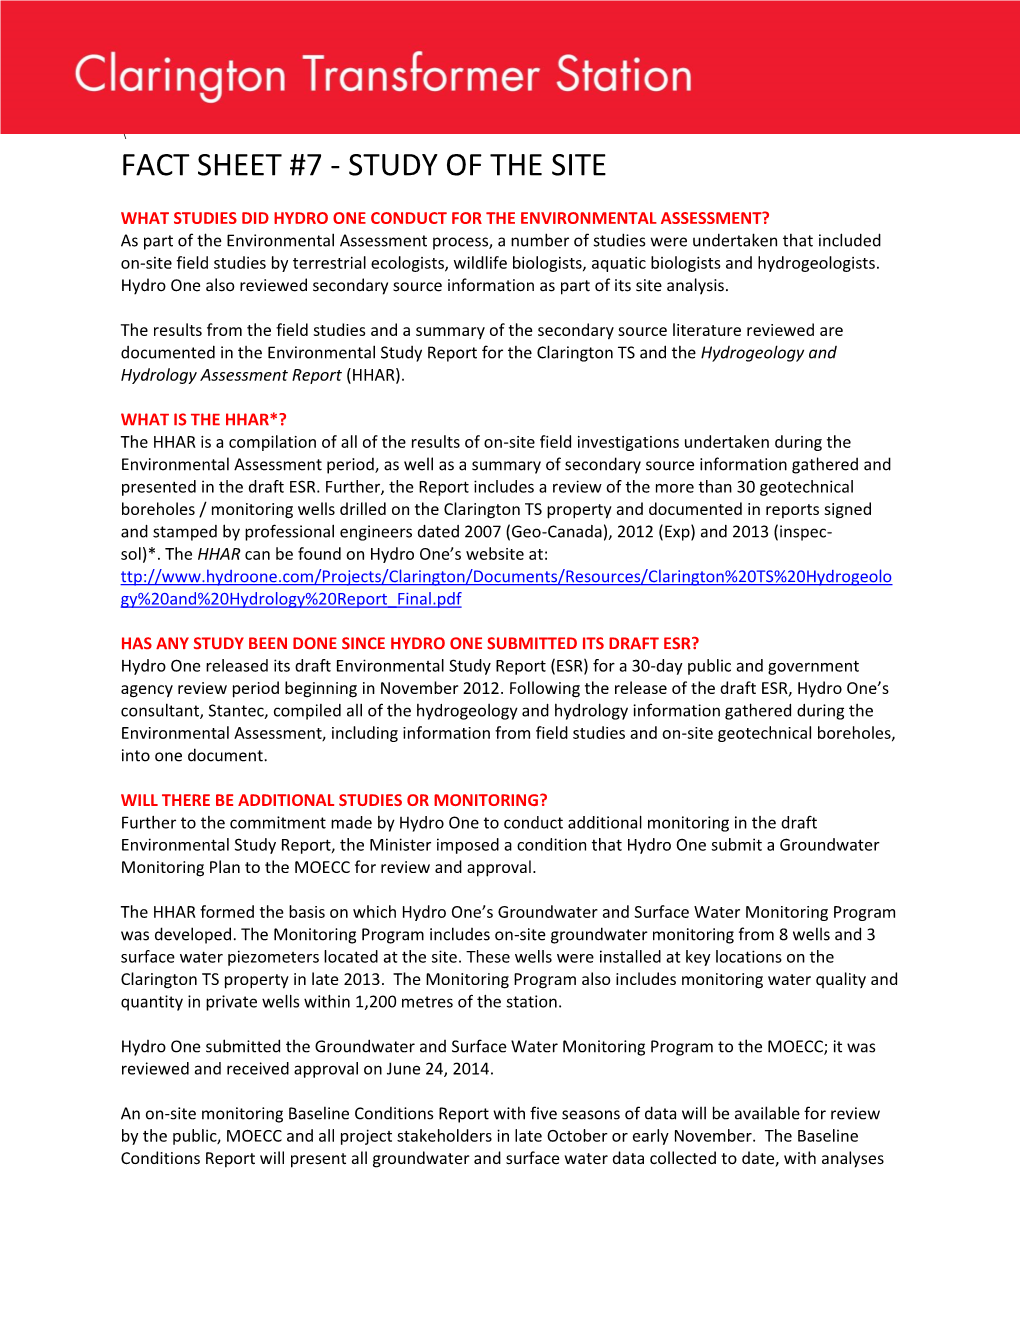 Fact Sheet #7 - Study of the Site